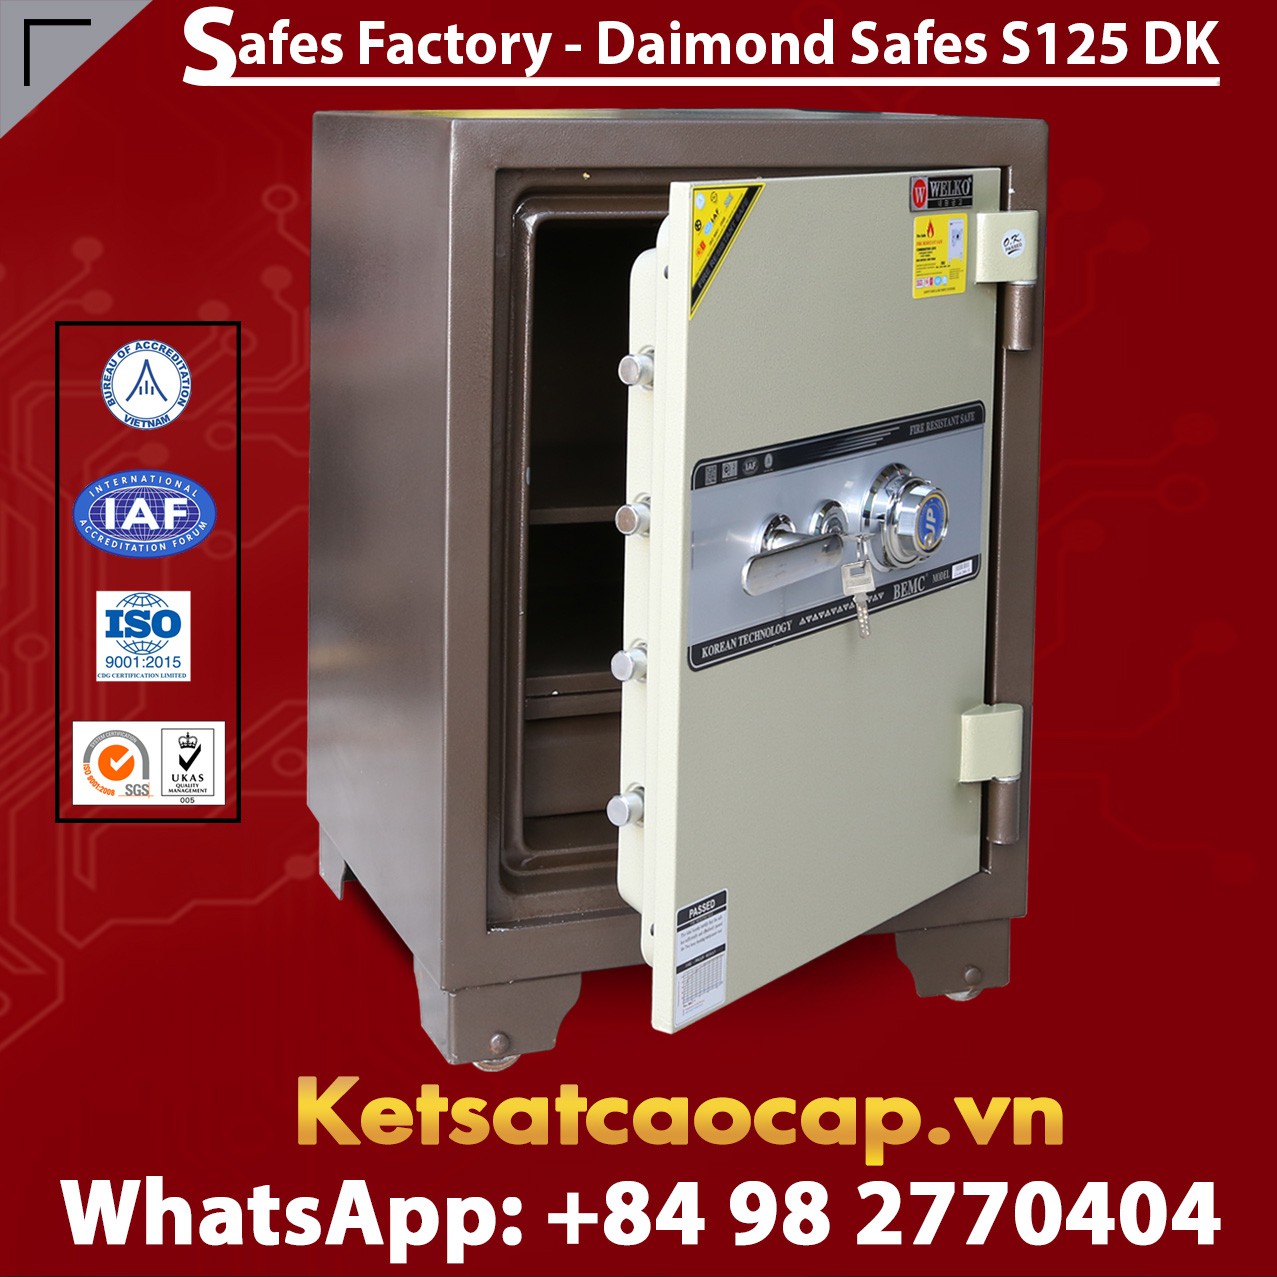 Big Safes Suppliers and Exporters uy tín